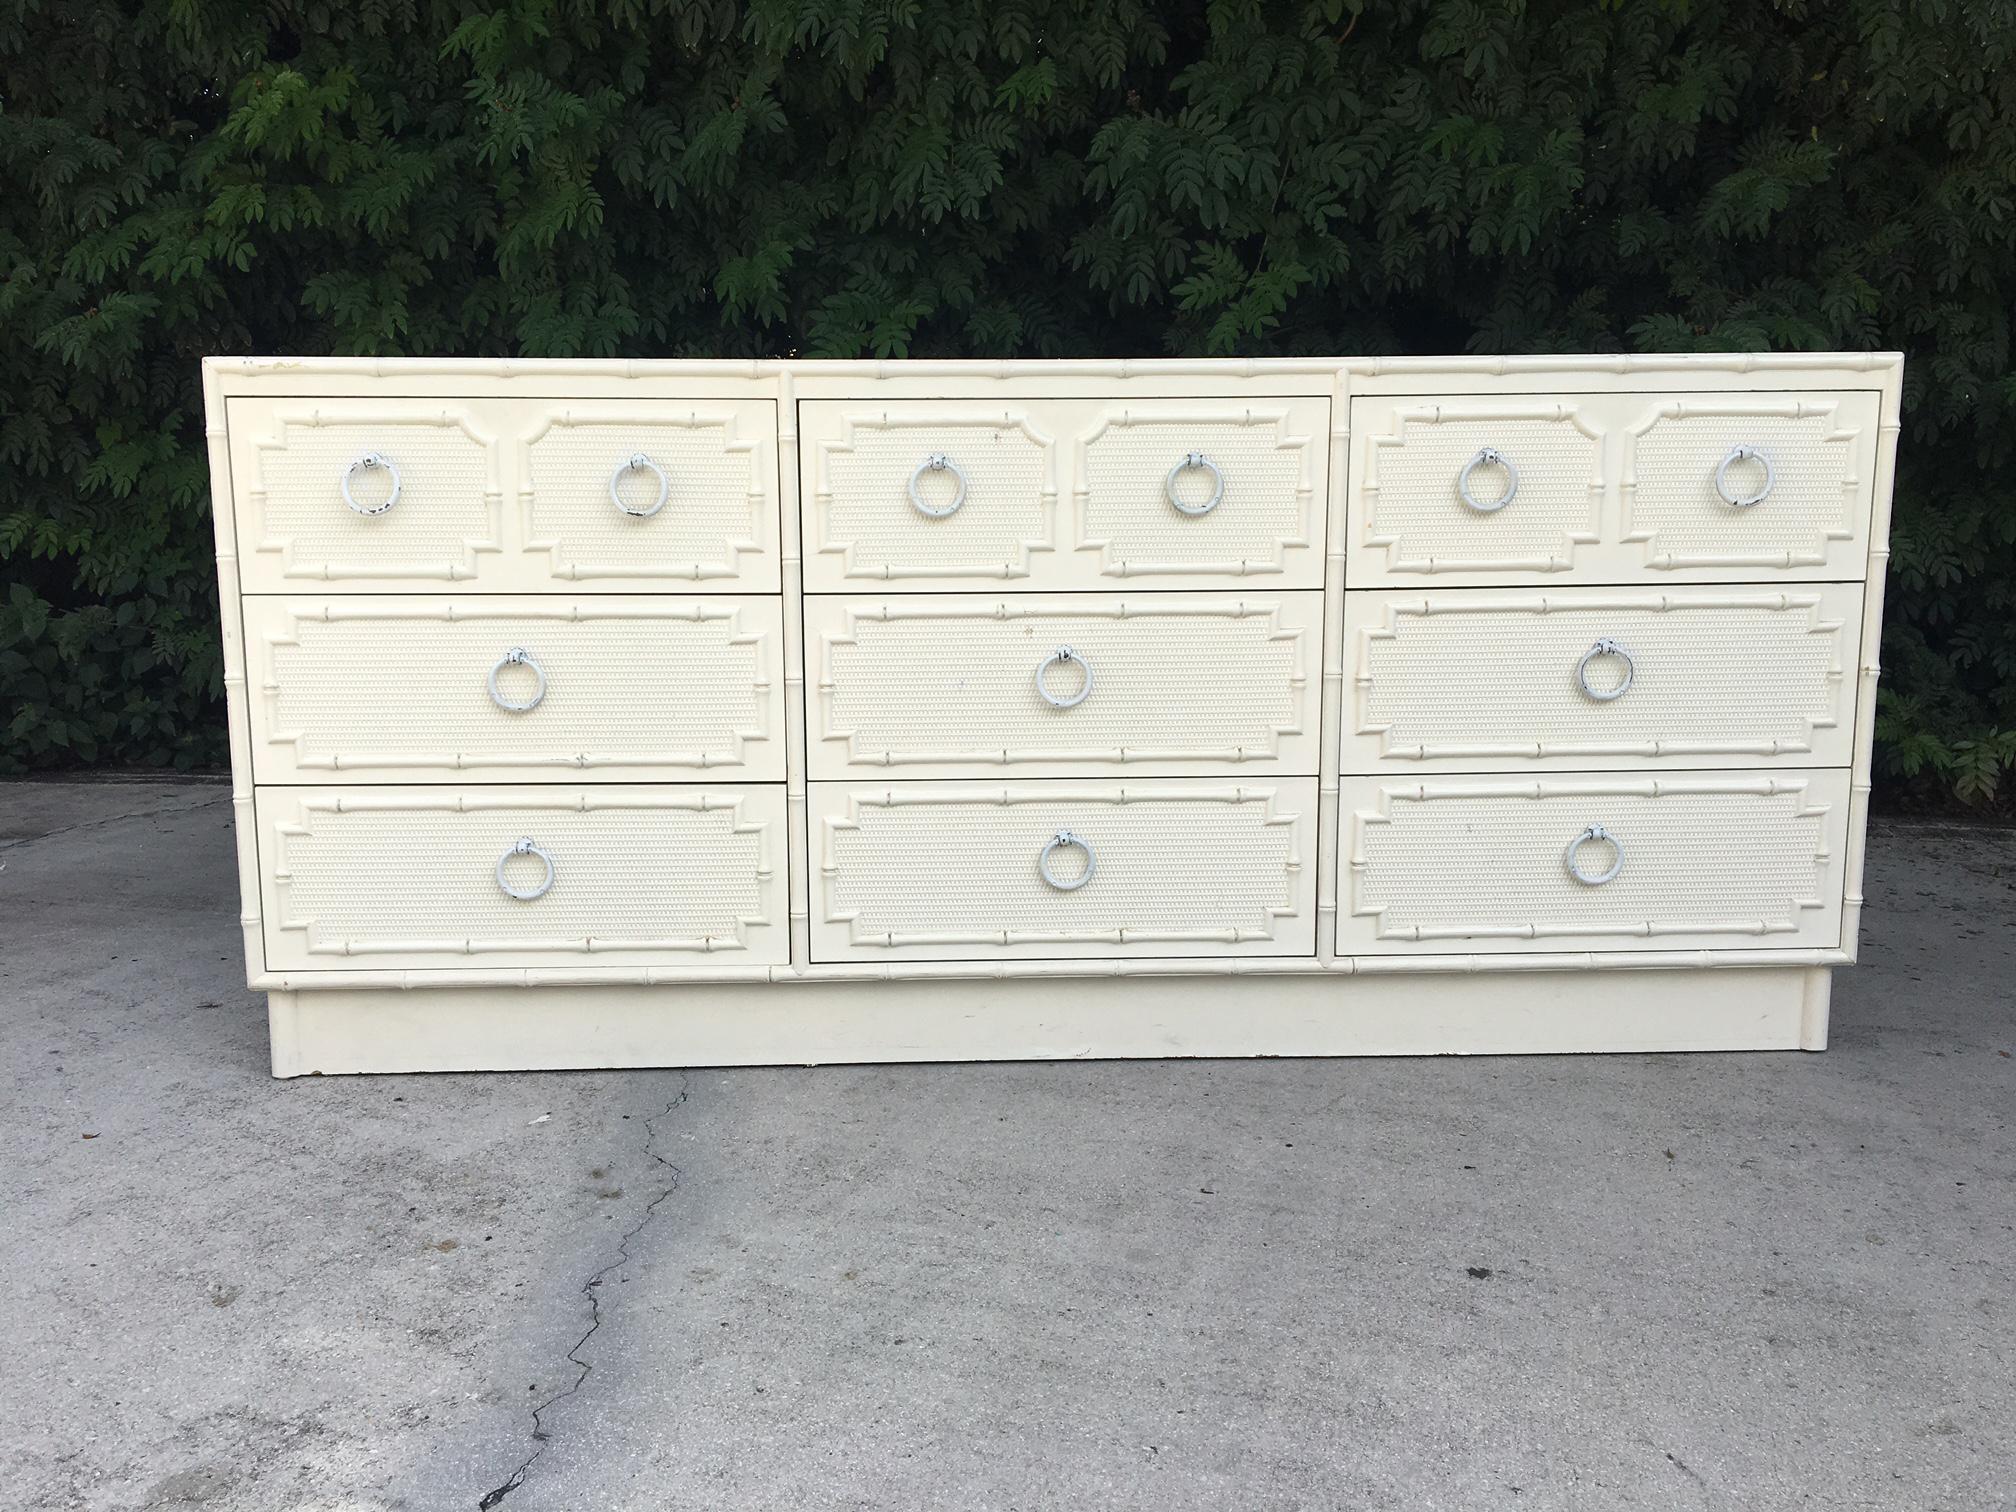 Nine-drawer dresser in faux bamboo by Omega furniture features original hardware and faux rattan-front drawers. Good vintage condition with minor losses consistent with age.